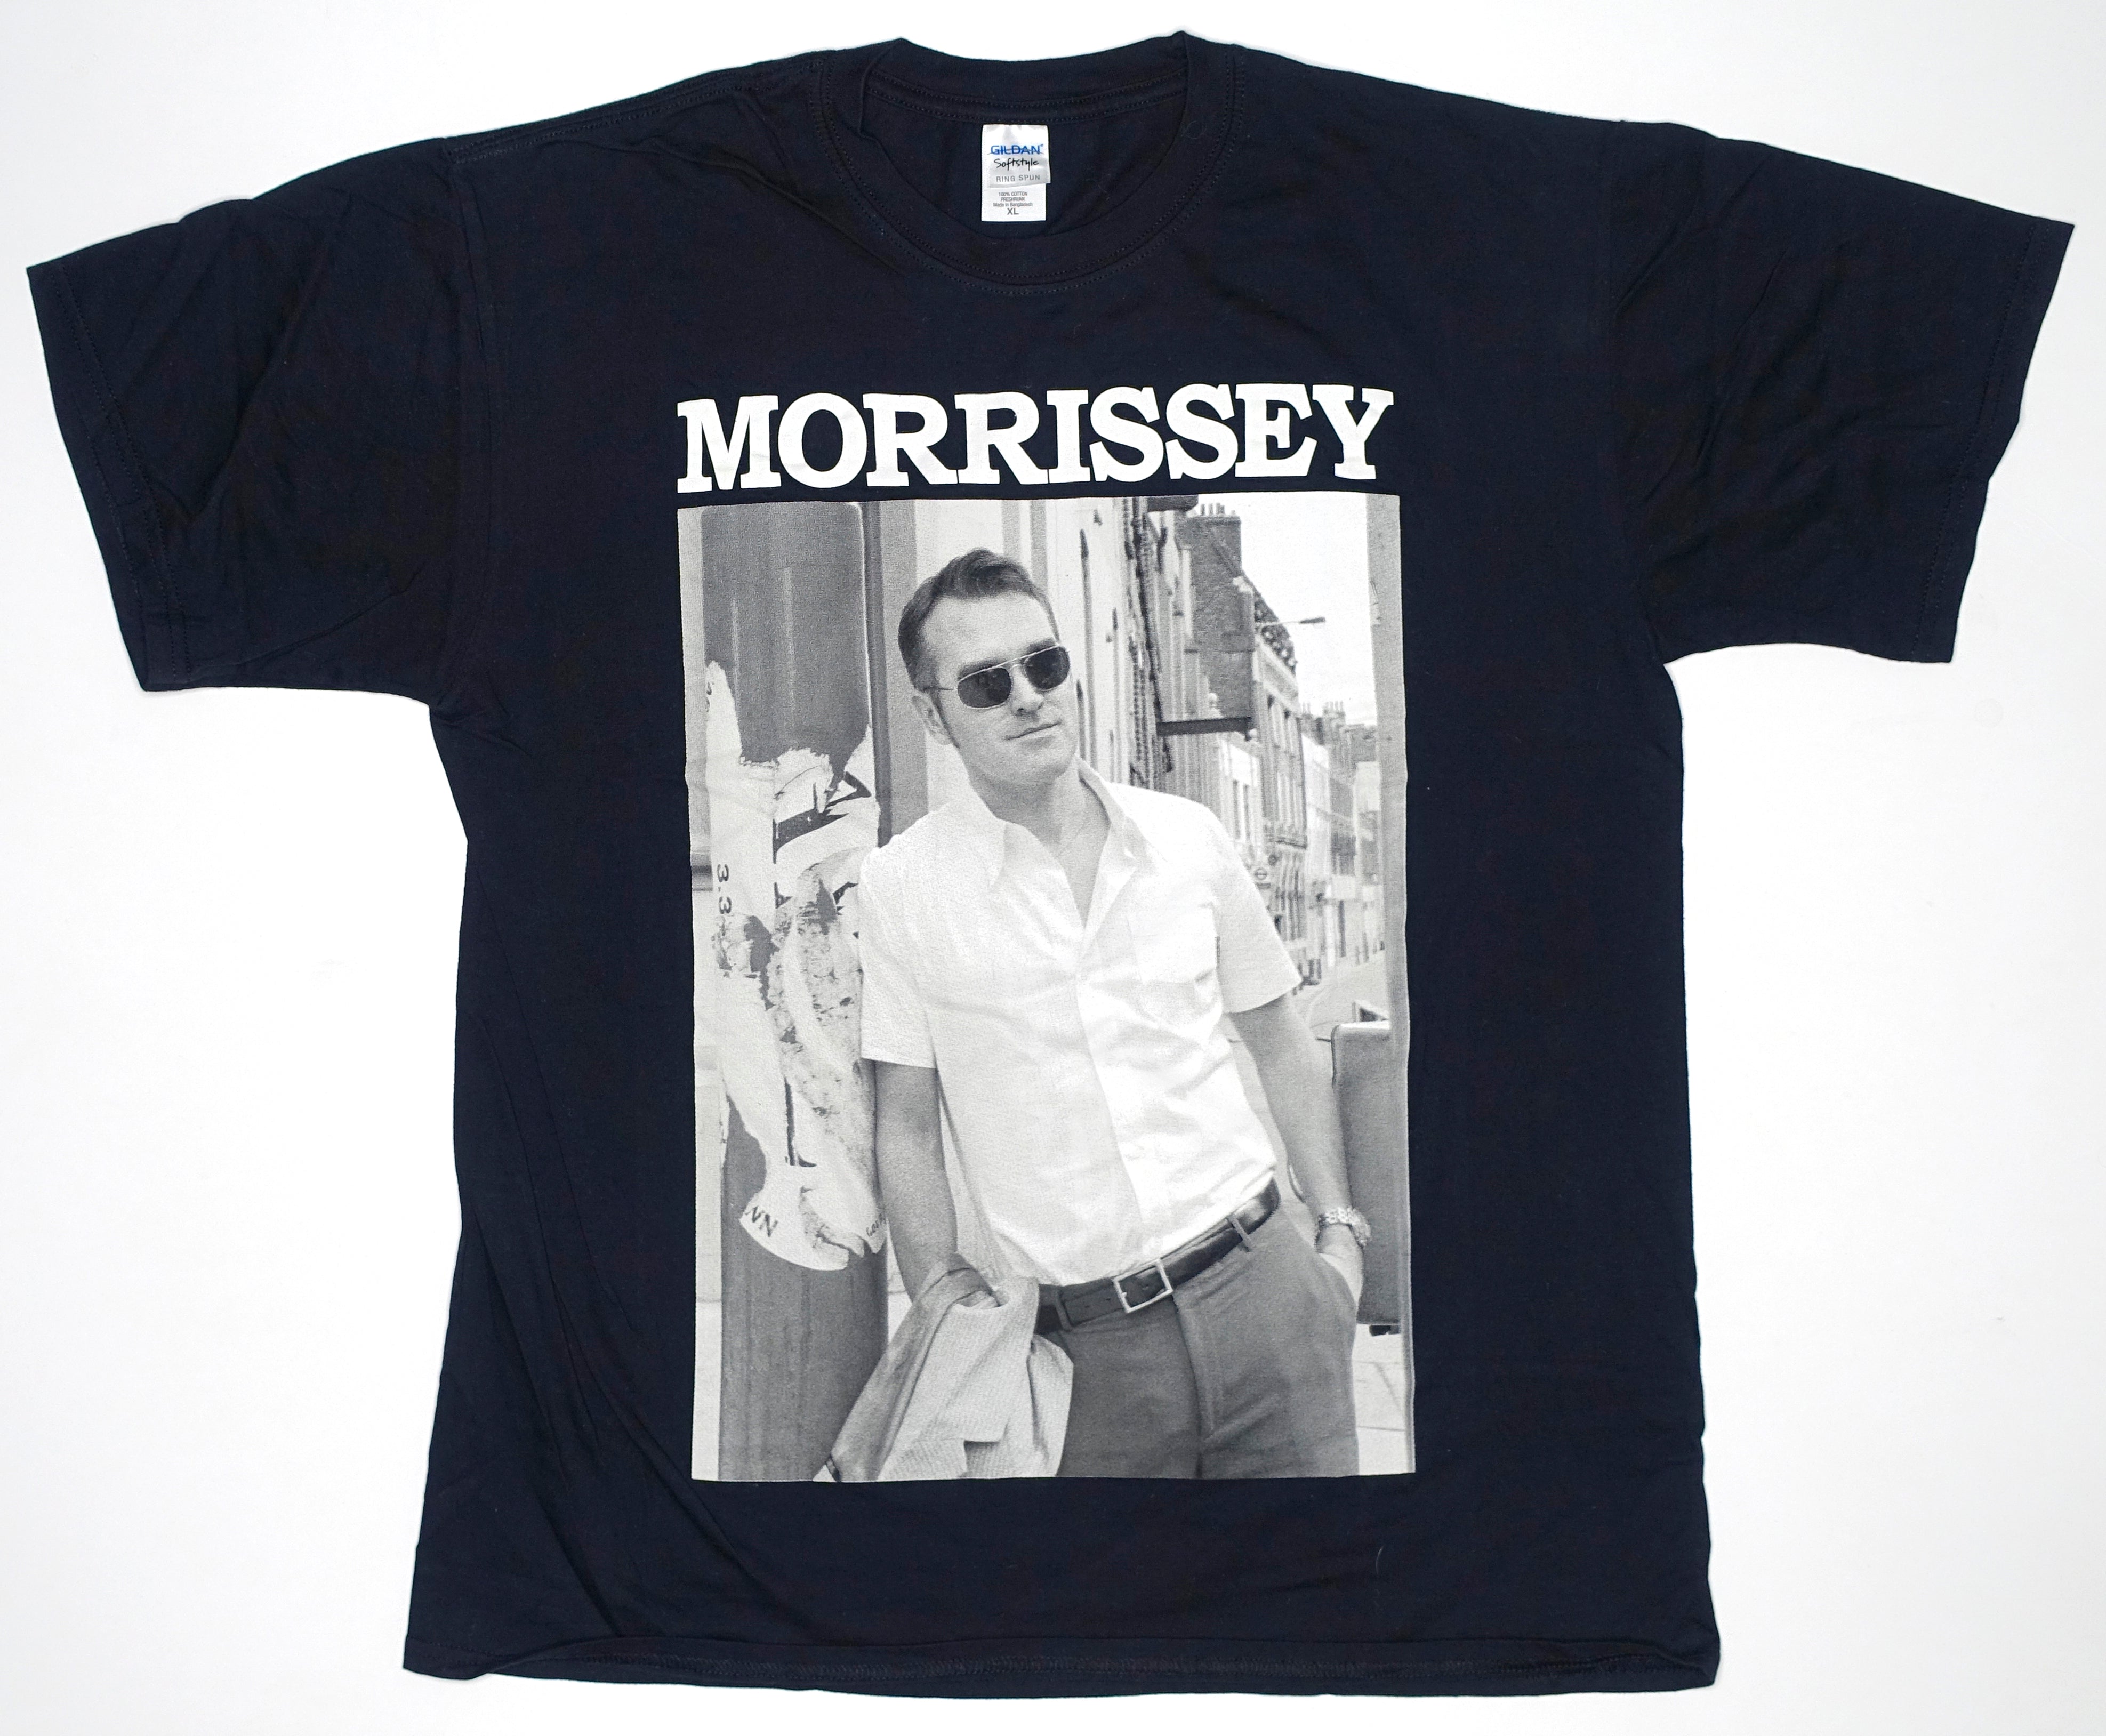 Morrissey - Maladjusted Redux Cover Tour Shirt Size XL